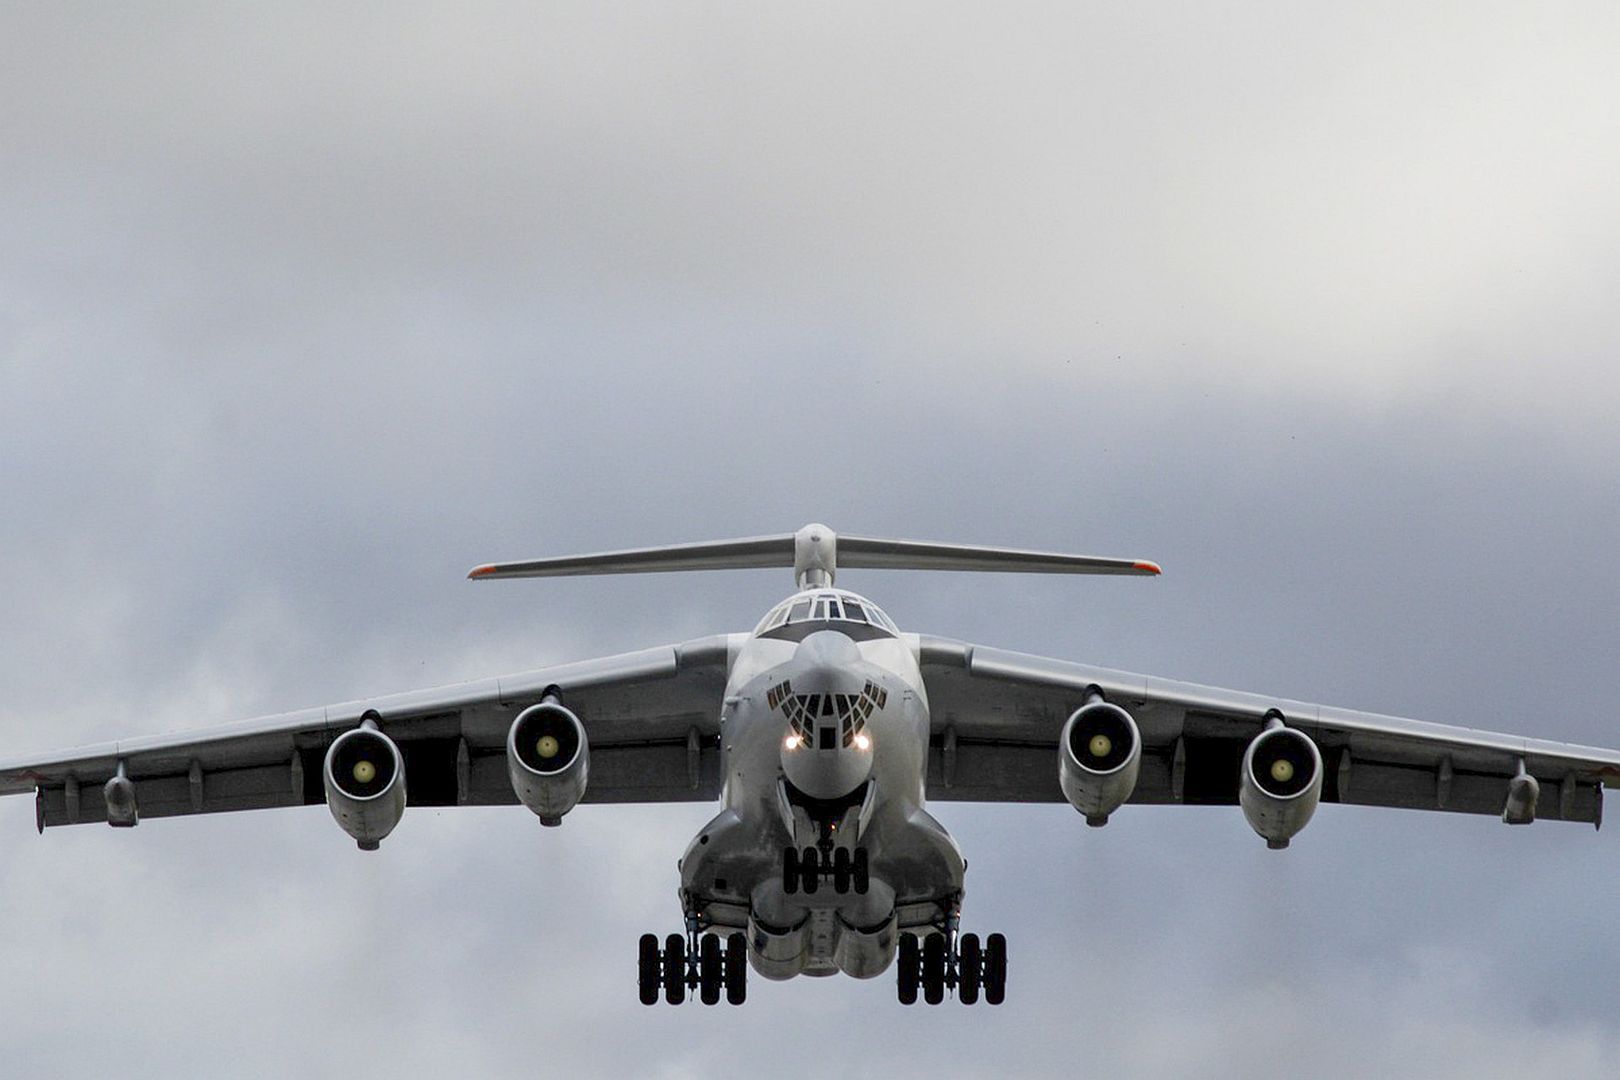 78 Tanker Aircraft Of The Russian Air Force